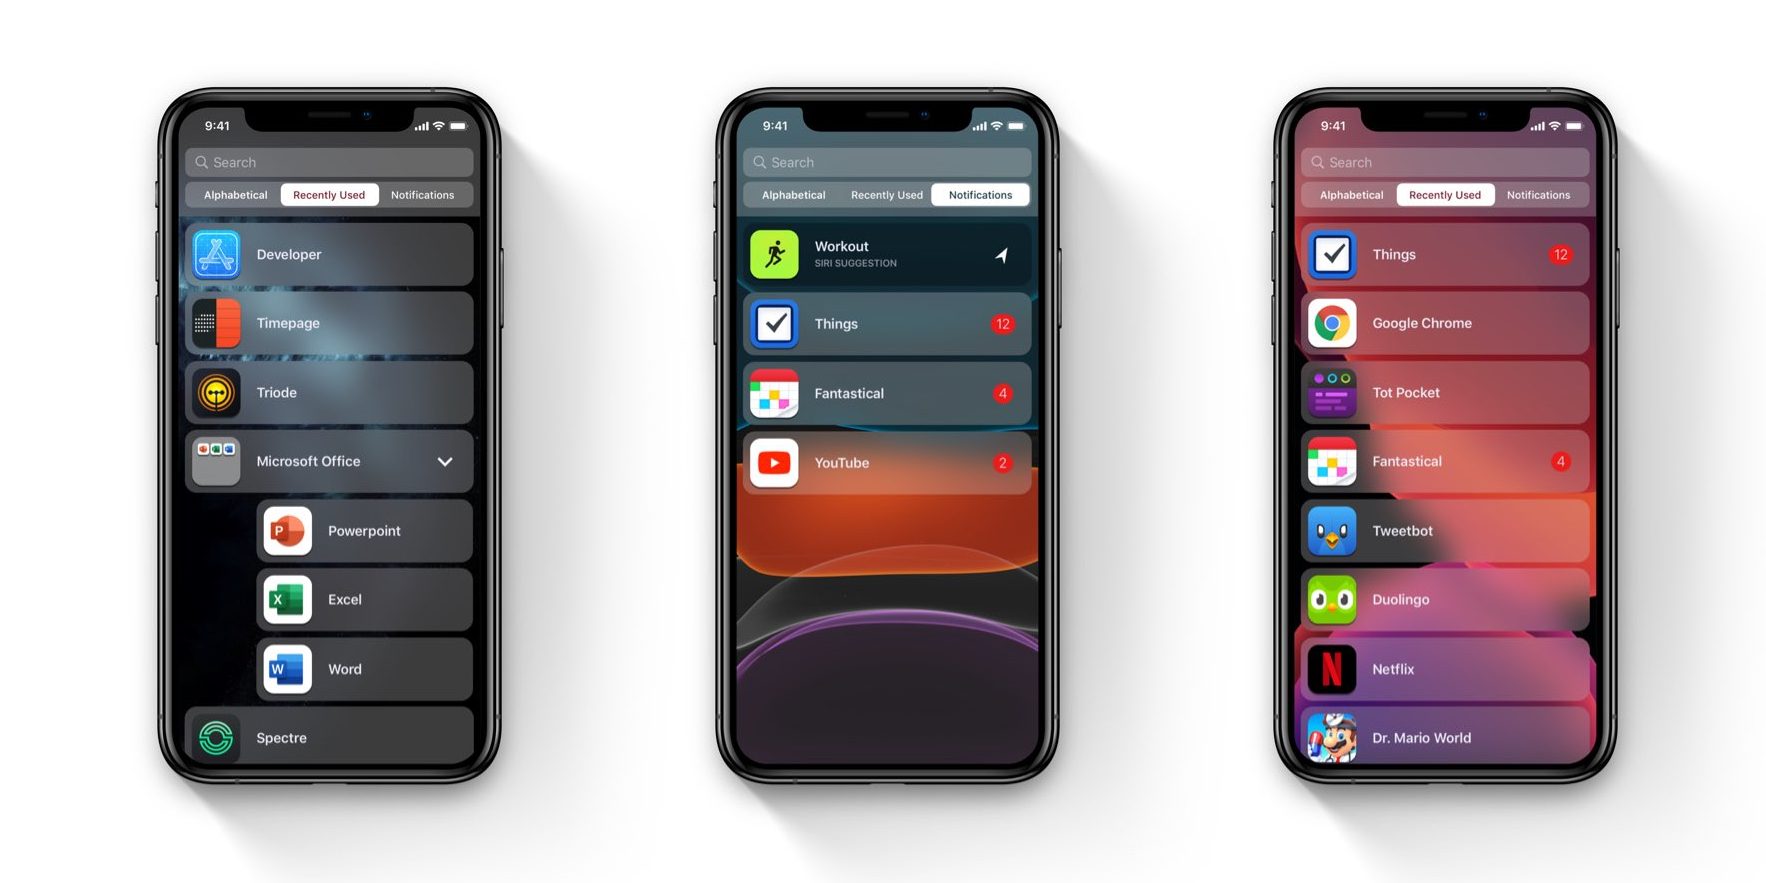 Mockups imagine what the leaked iOS 14 home screen changes will look like